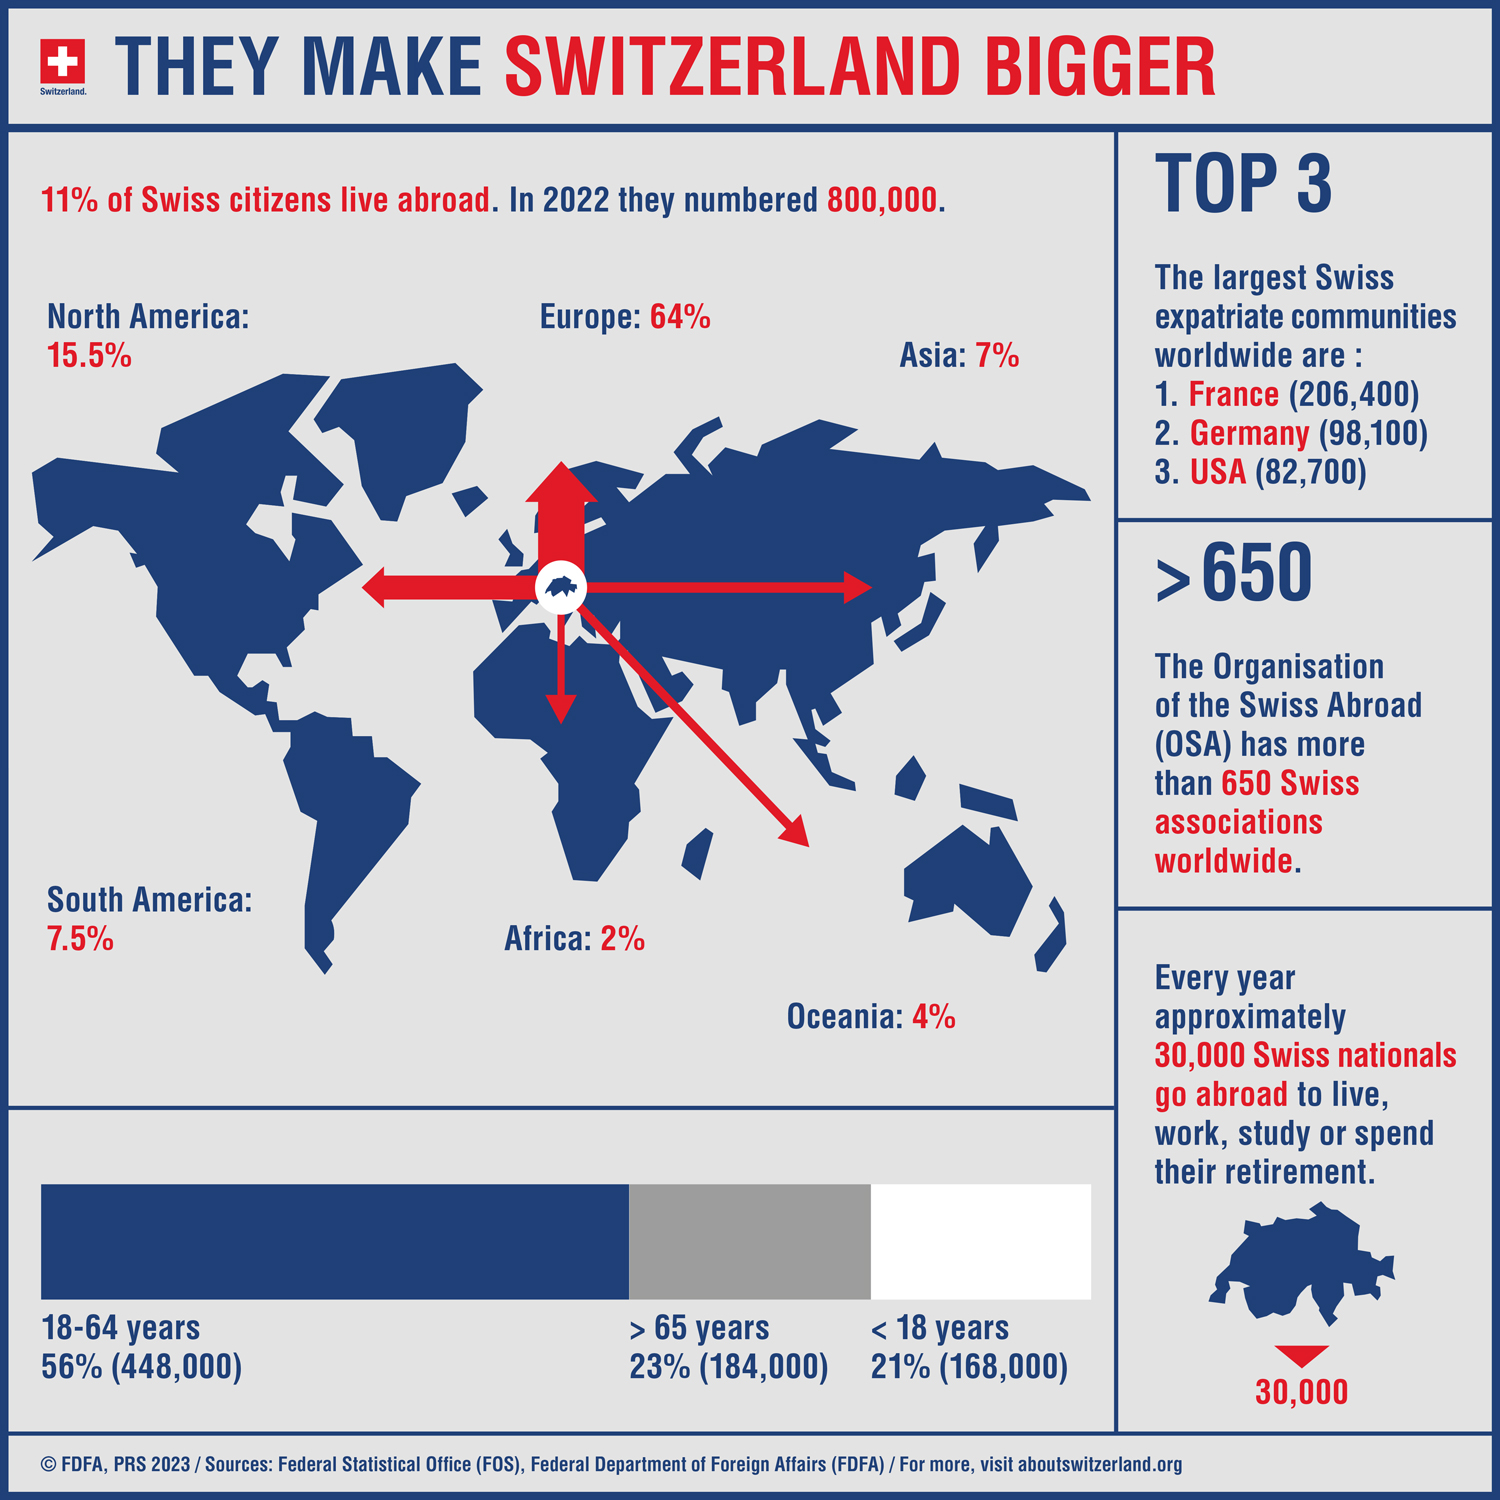 Infographic showing facts and figures on the Swiss abroad.